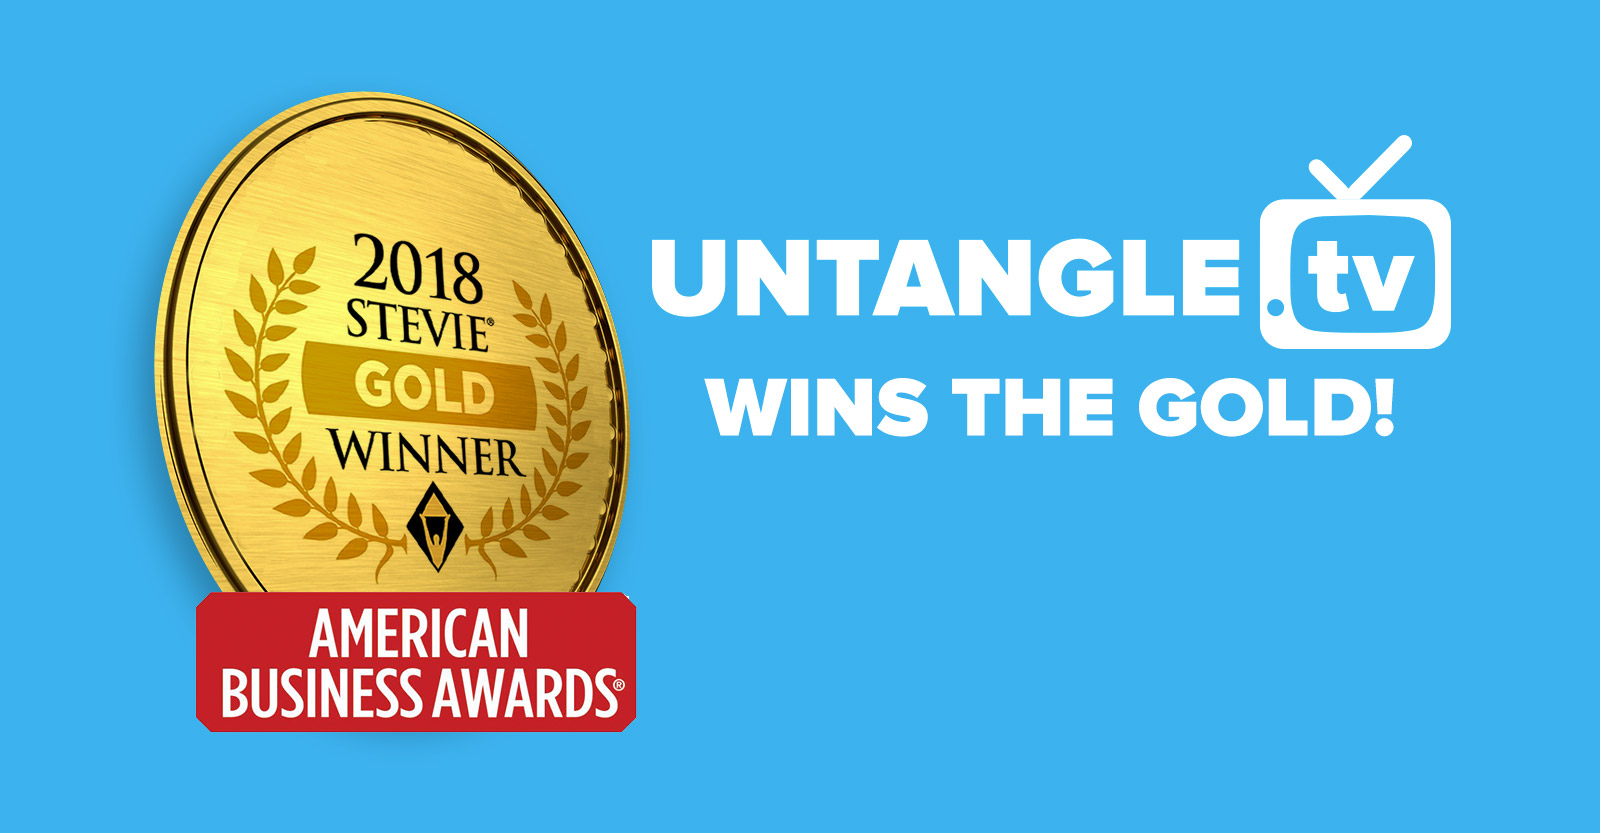 Untangle.TV wins the gold medal